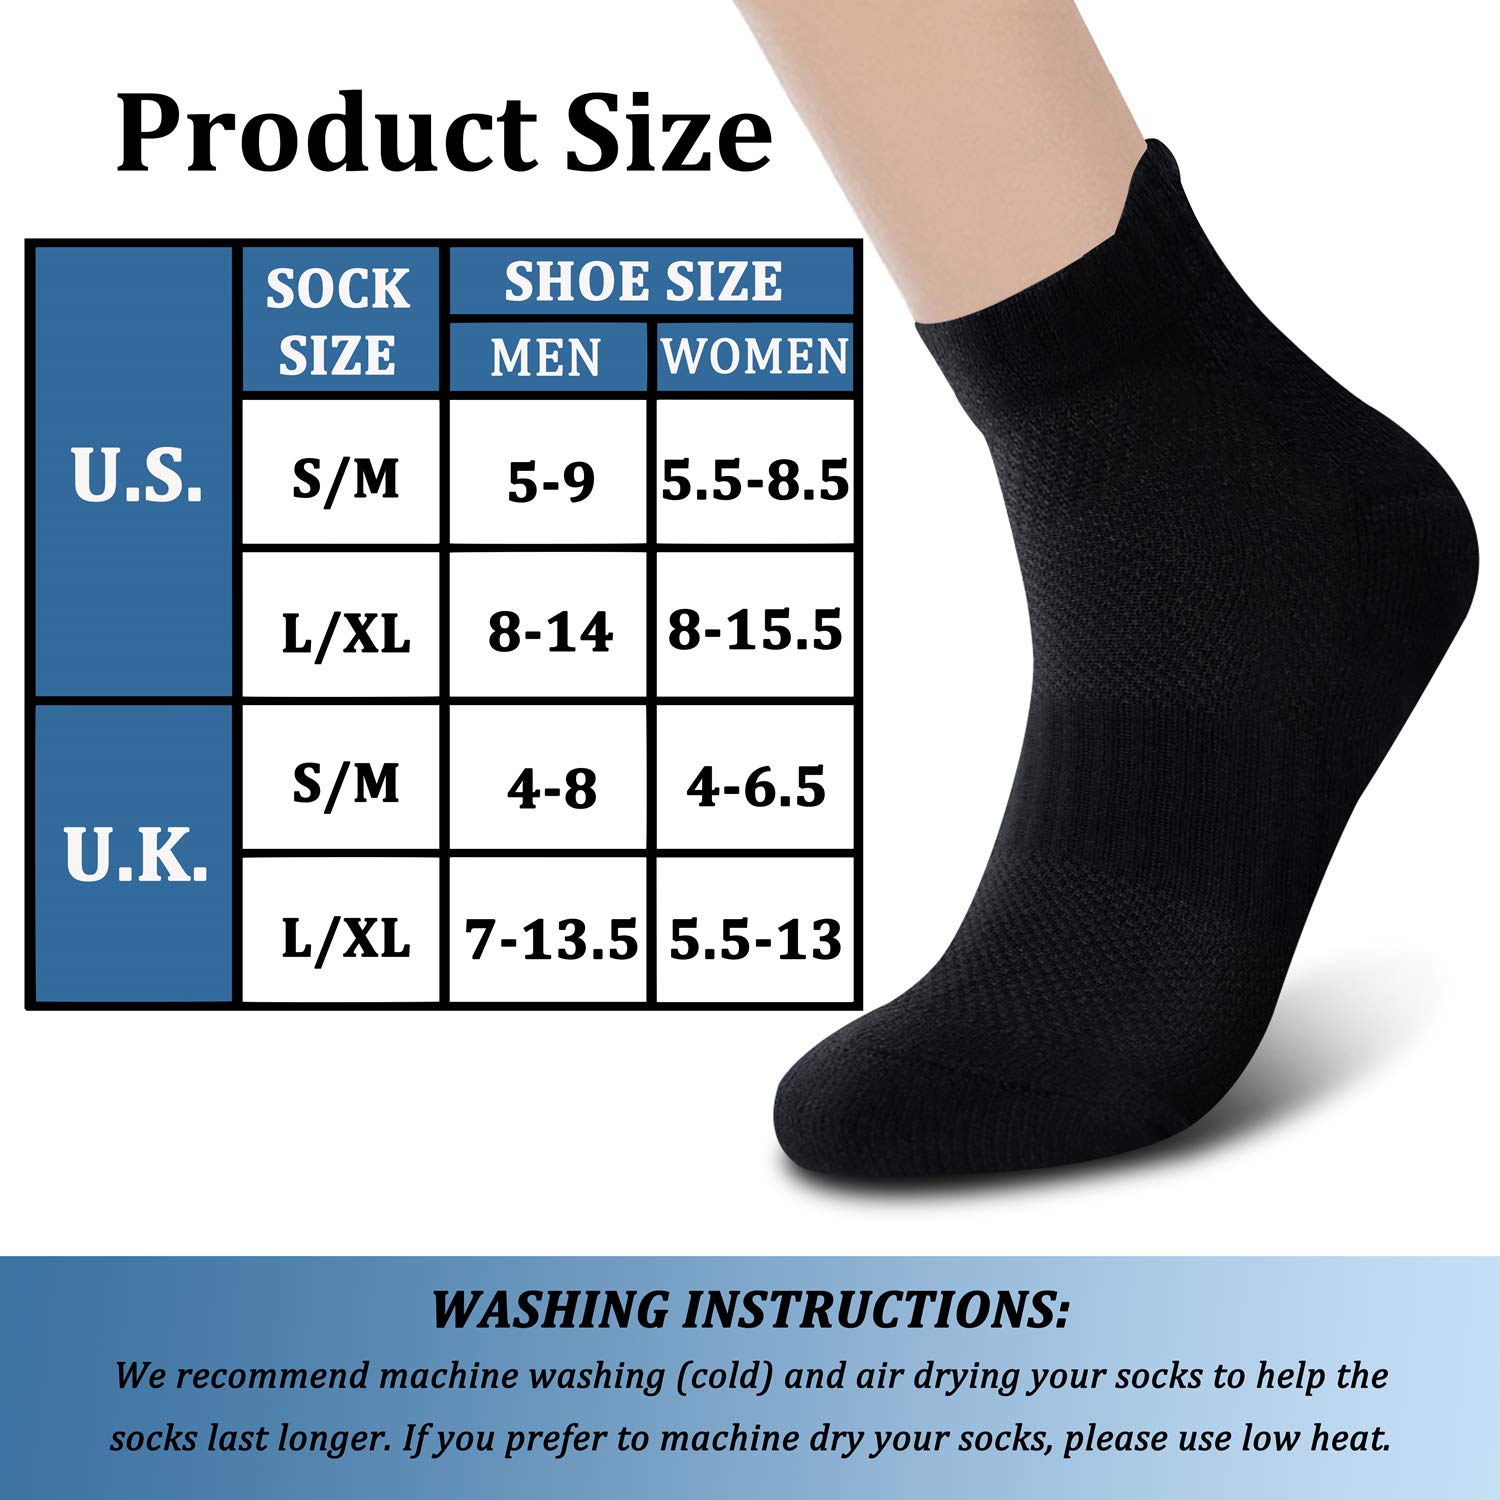 CHARMKING Graduated Compression Socks for Women & Men Circulation 15-20 mmHg is Best for Athletic, Running, Flight Travel, Pregnant, Cycling (Multi 13,S/M)